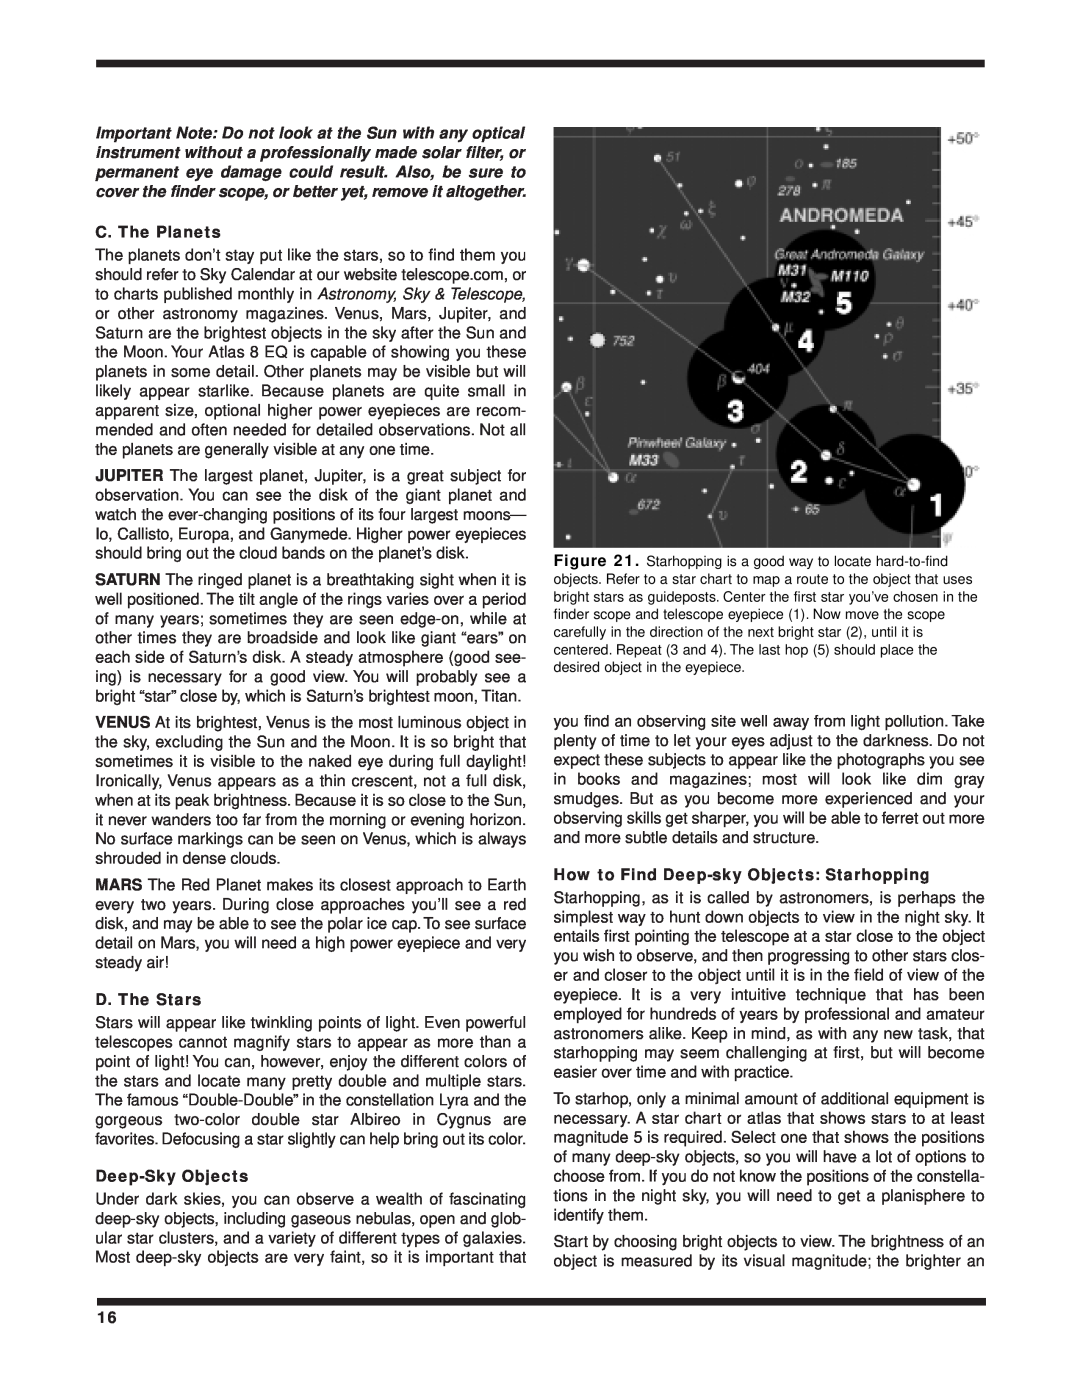 Orion 8 EQ instruction manual C. The Planets, D. The Stars, Deep-SkyObjects, How to Find Deep-skyObjects Starhopping 